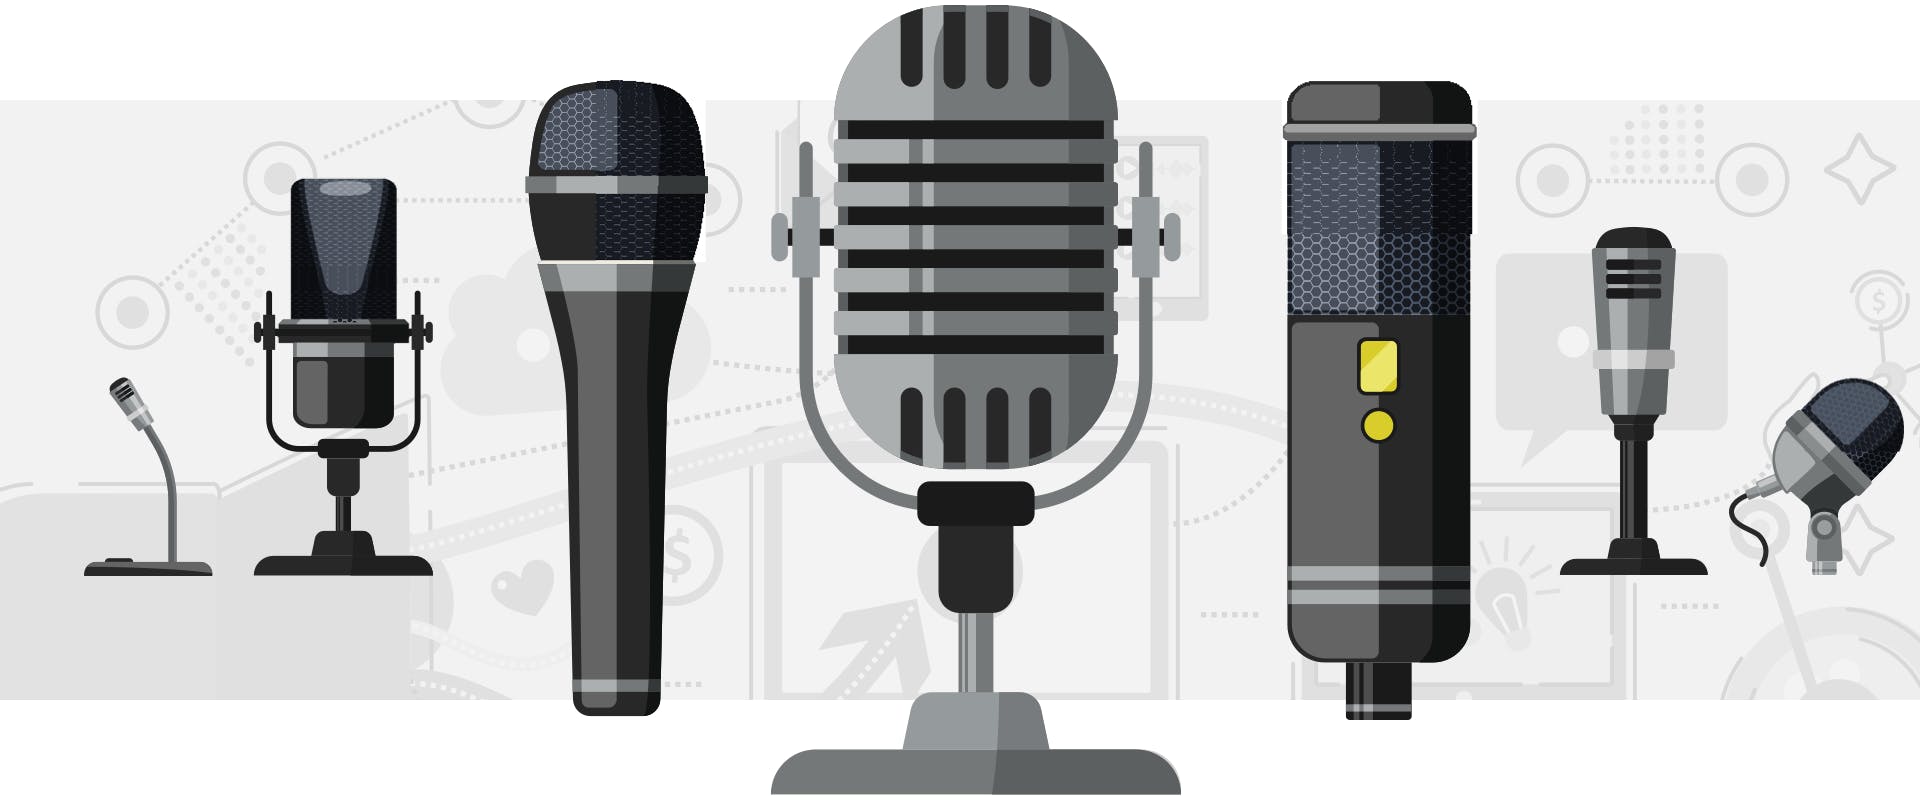 What's the Difference Between an XLR and USB Mic?